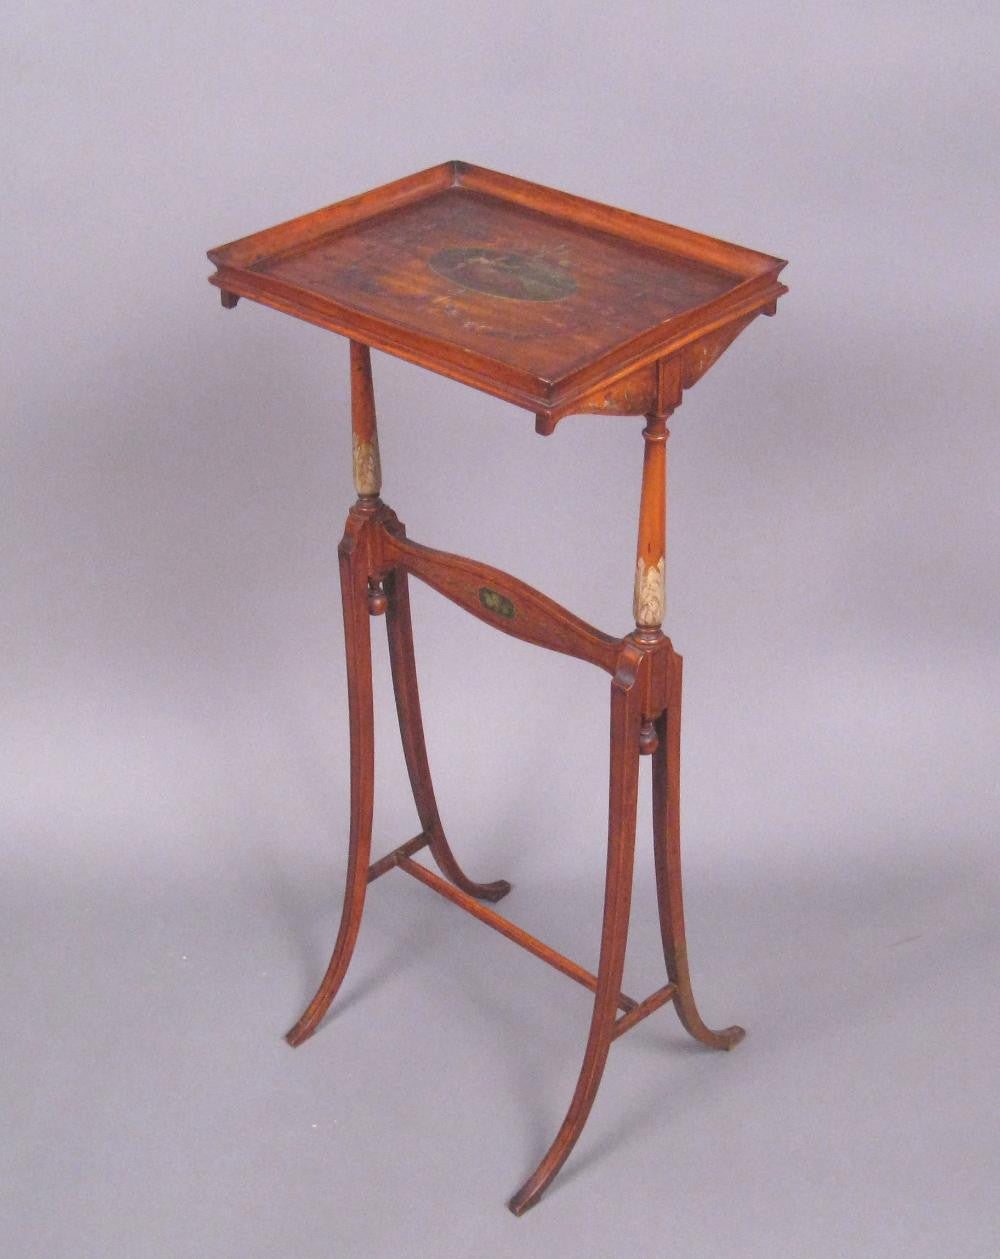 Edwardian Painted Stand or Small Table